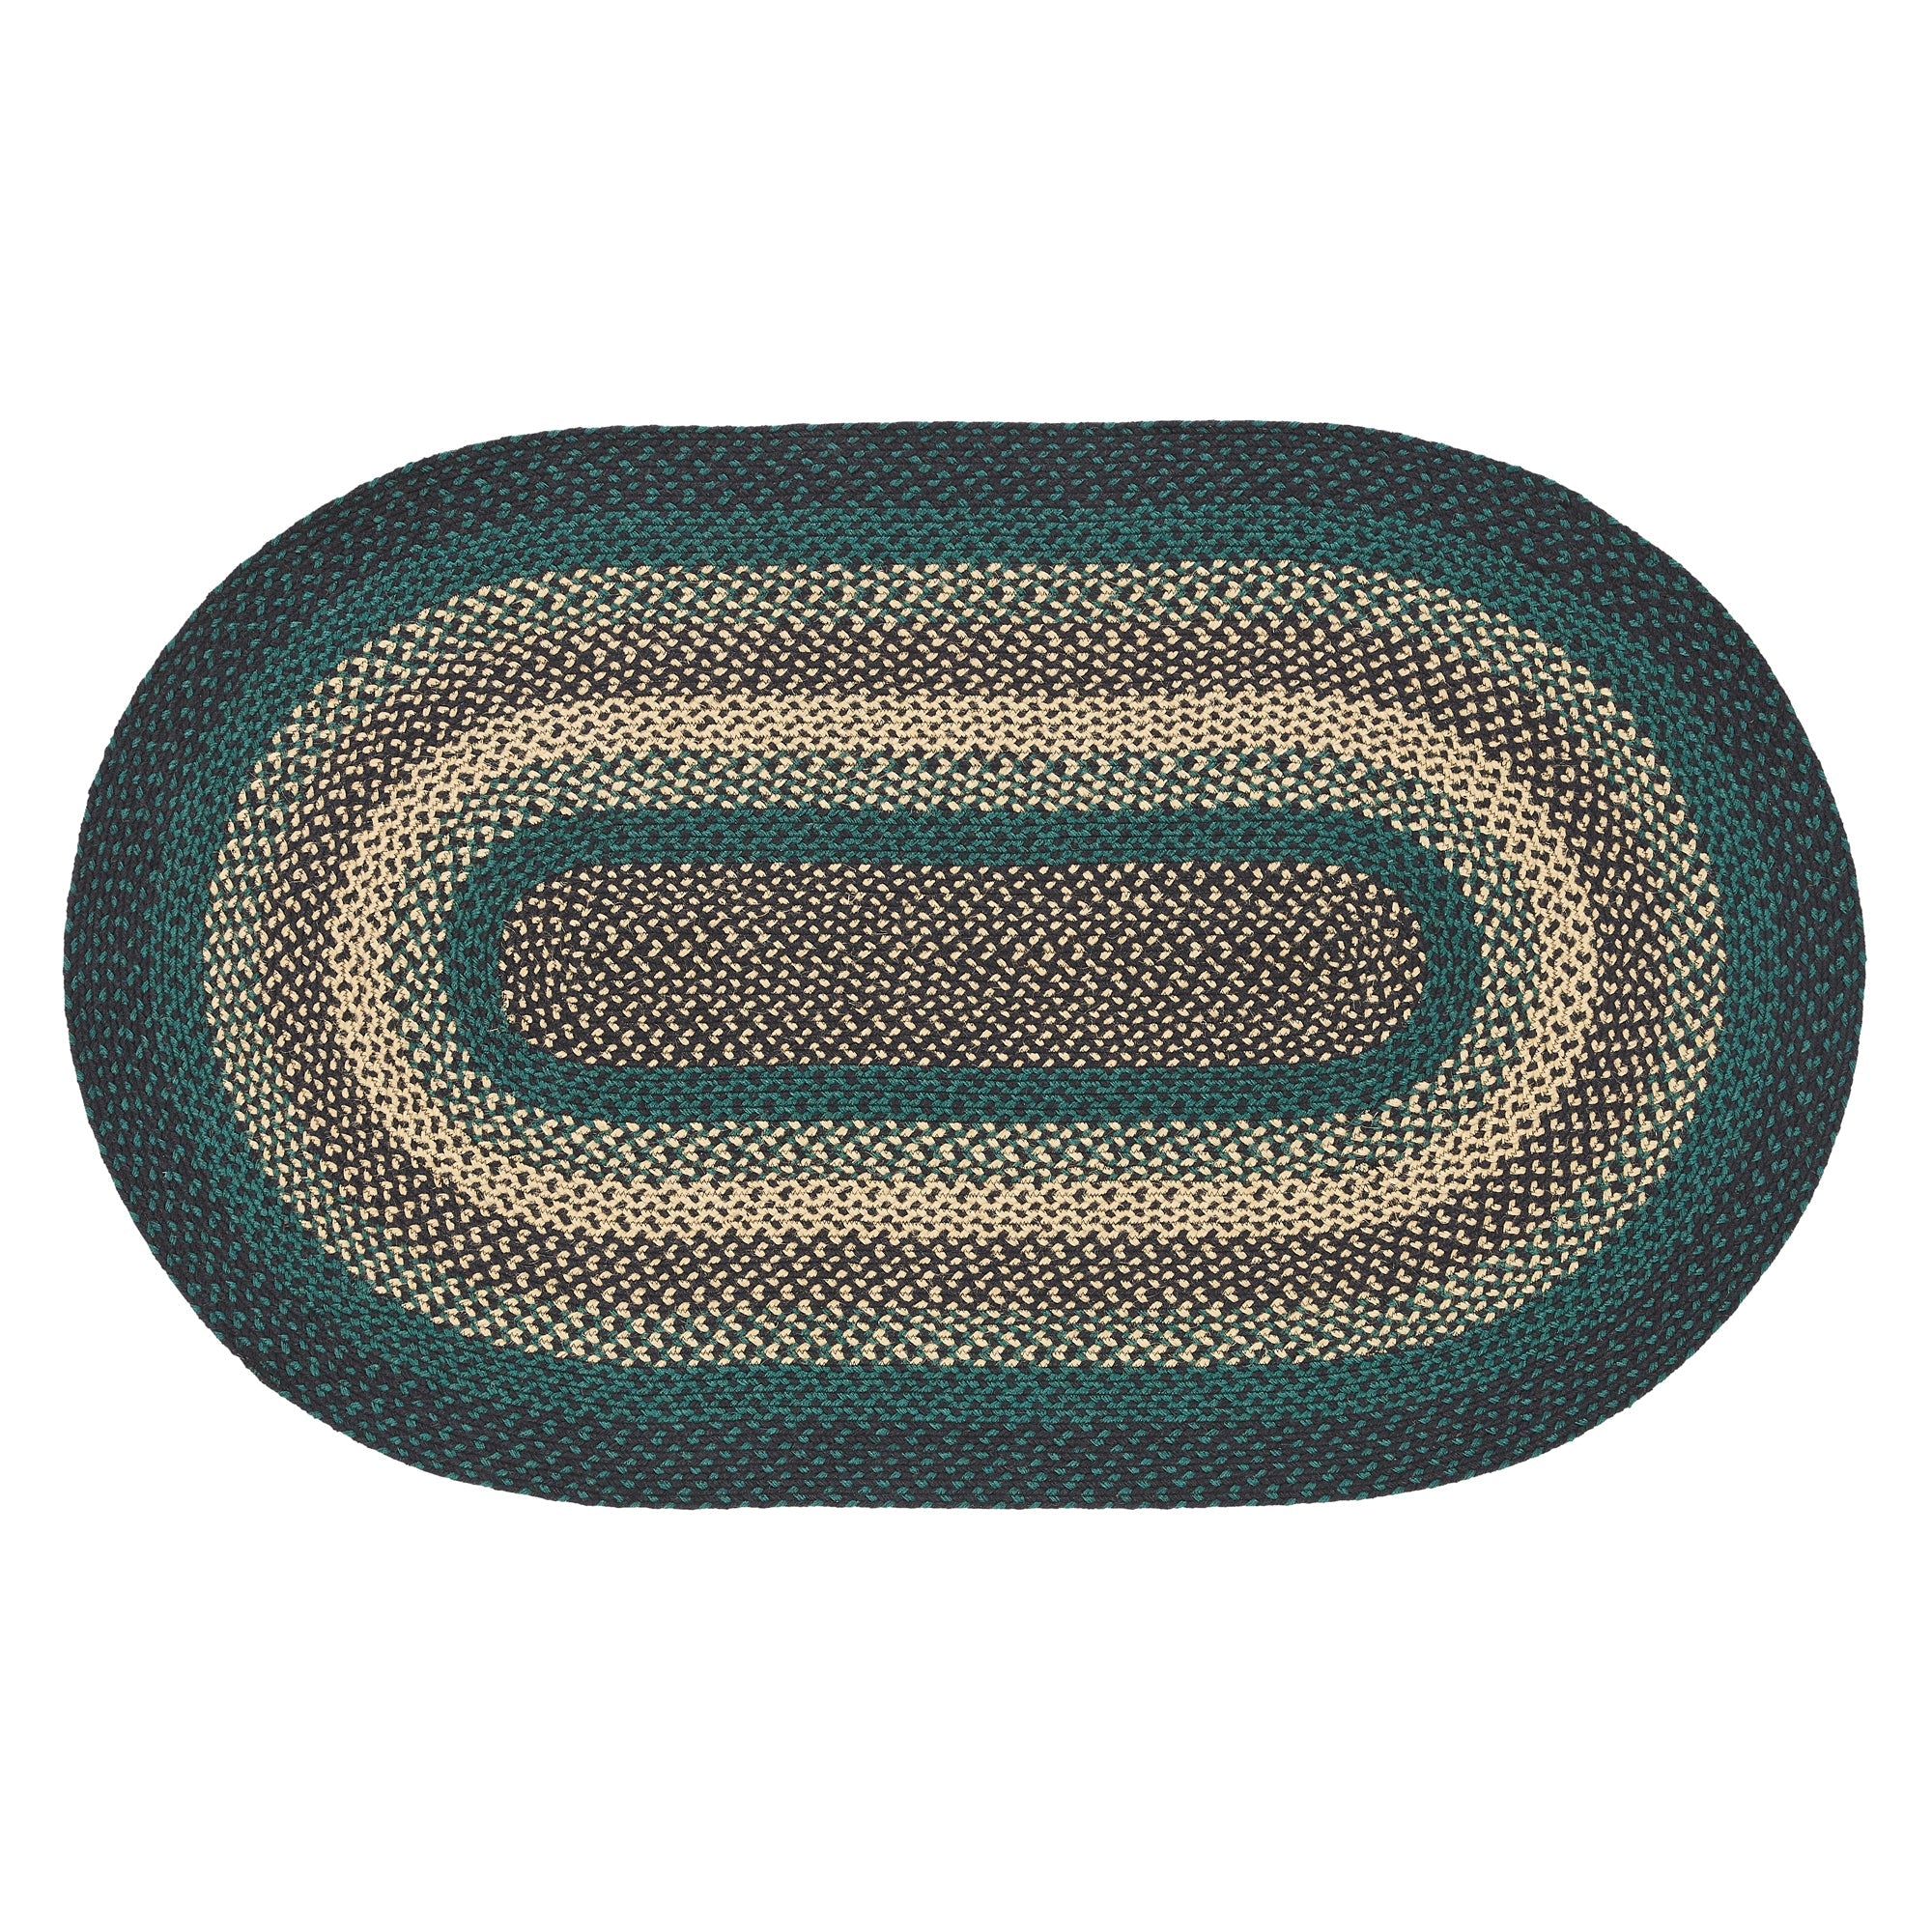 Pine Grove Jute Braided Rug Oval with Rug Pad 3'x5' VHC Brands